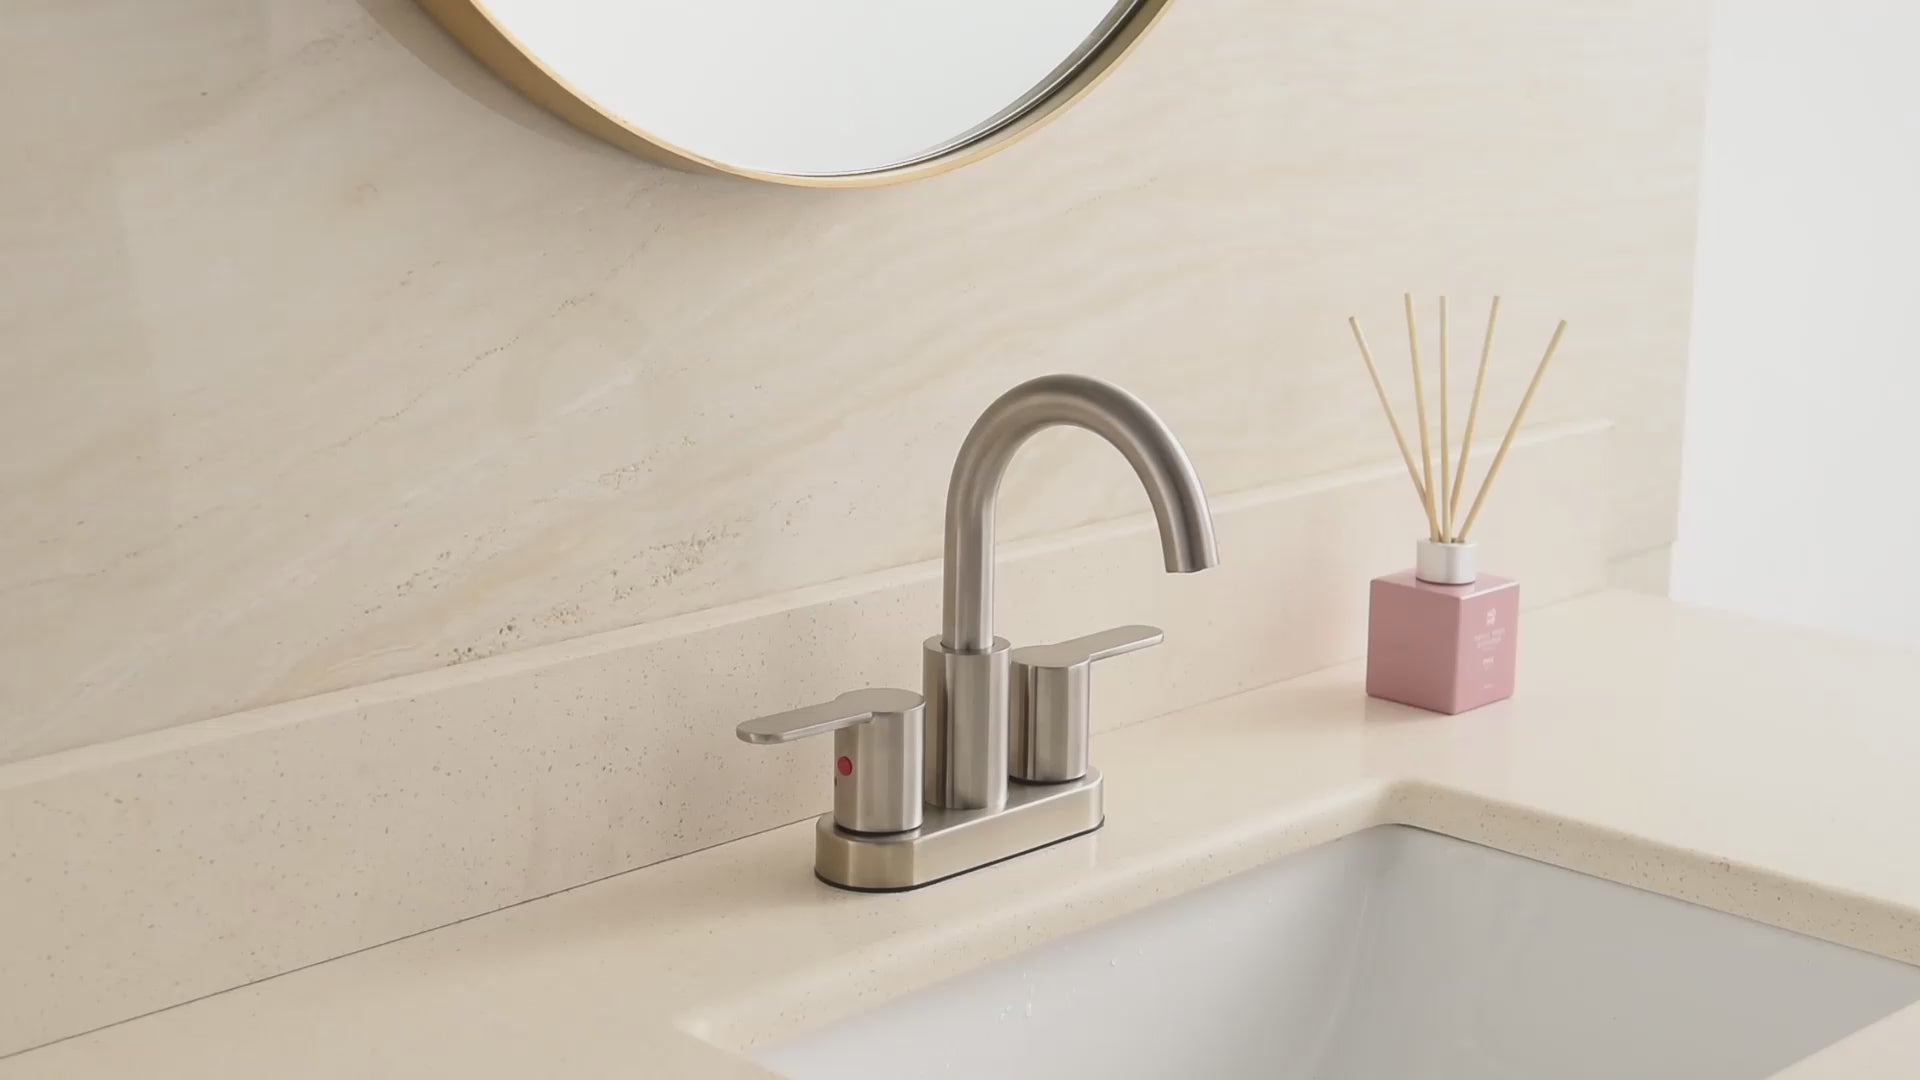 4 Inch Brushed Nickel Bathroom Centerset Faucet with Pop-up Drain